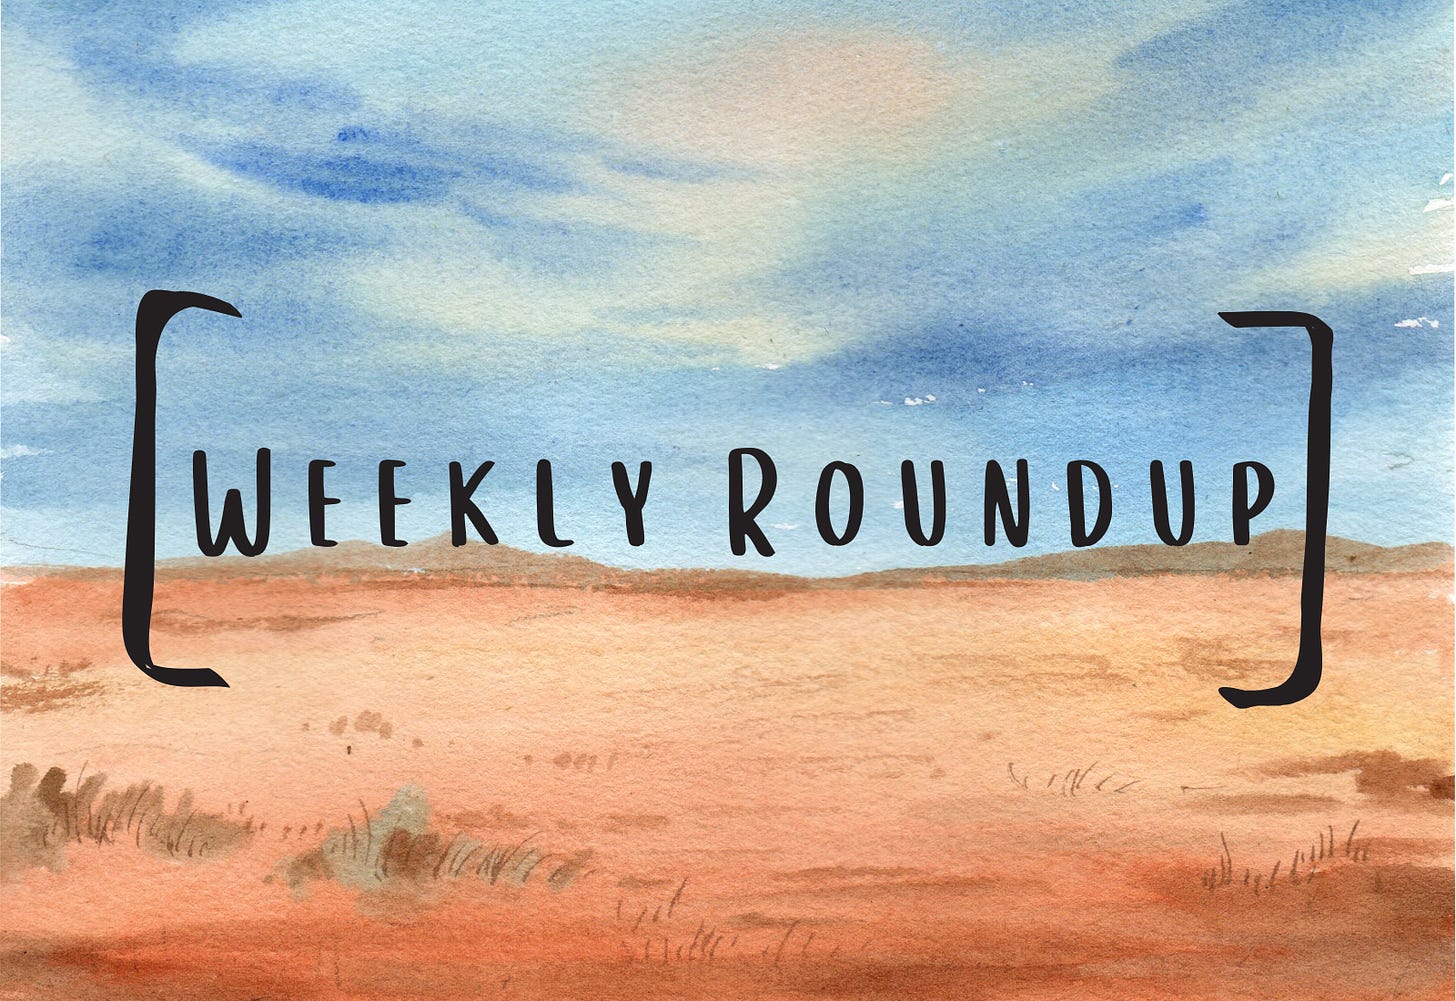 Image reads "Weekly Roundup."